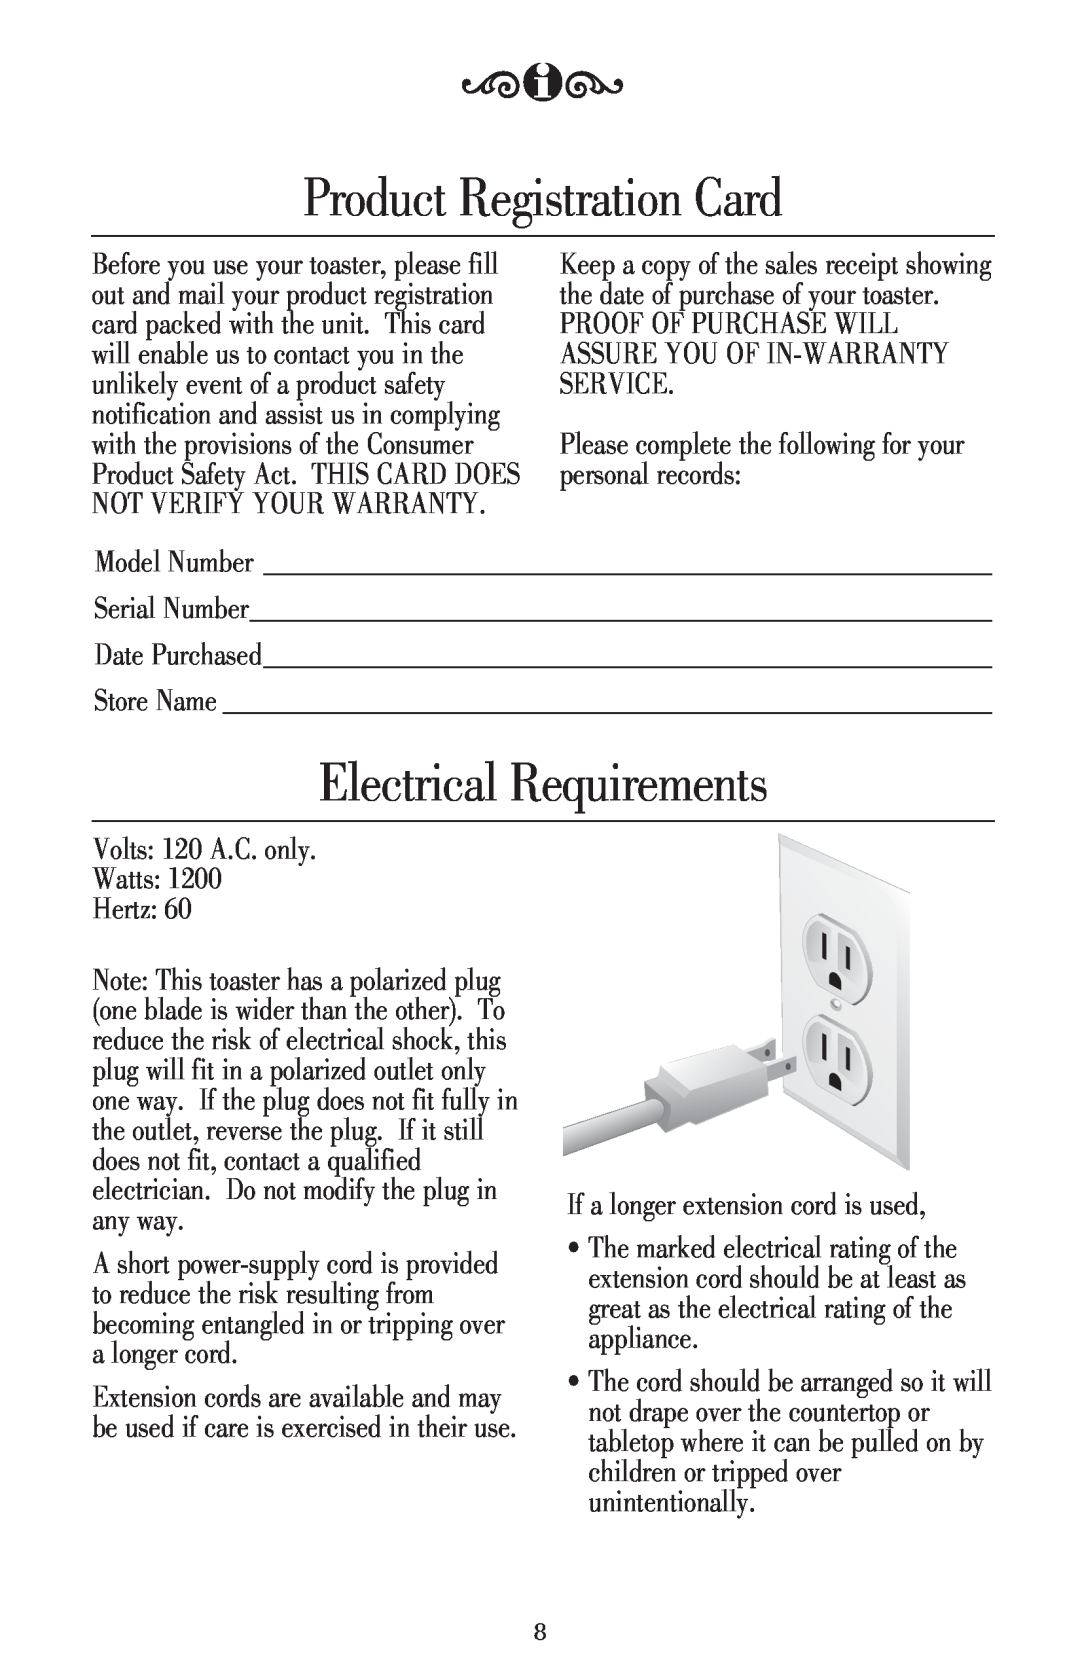 KitchenAid KTT220 manual Product Registration Card, Electrical Requirements 